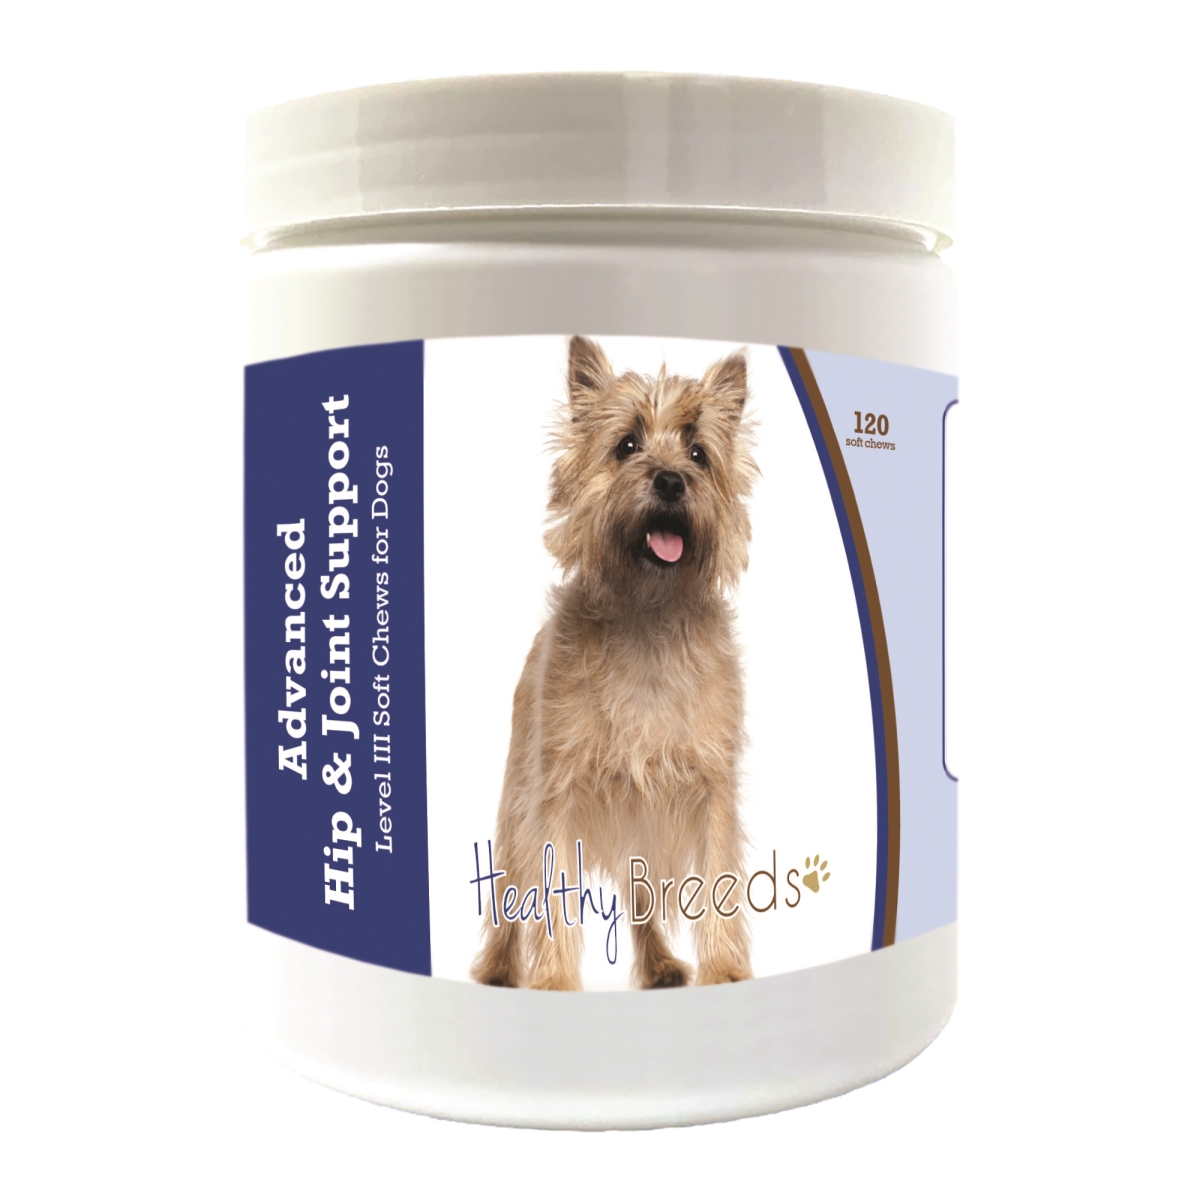 Picture of Healthy Breeds 192959897838 Cairn Terrier Advanced Hip & Joint Support Level III Soft Chews for Dogs